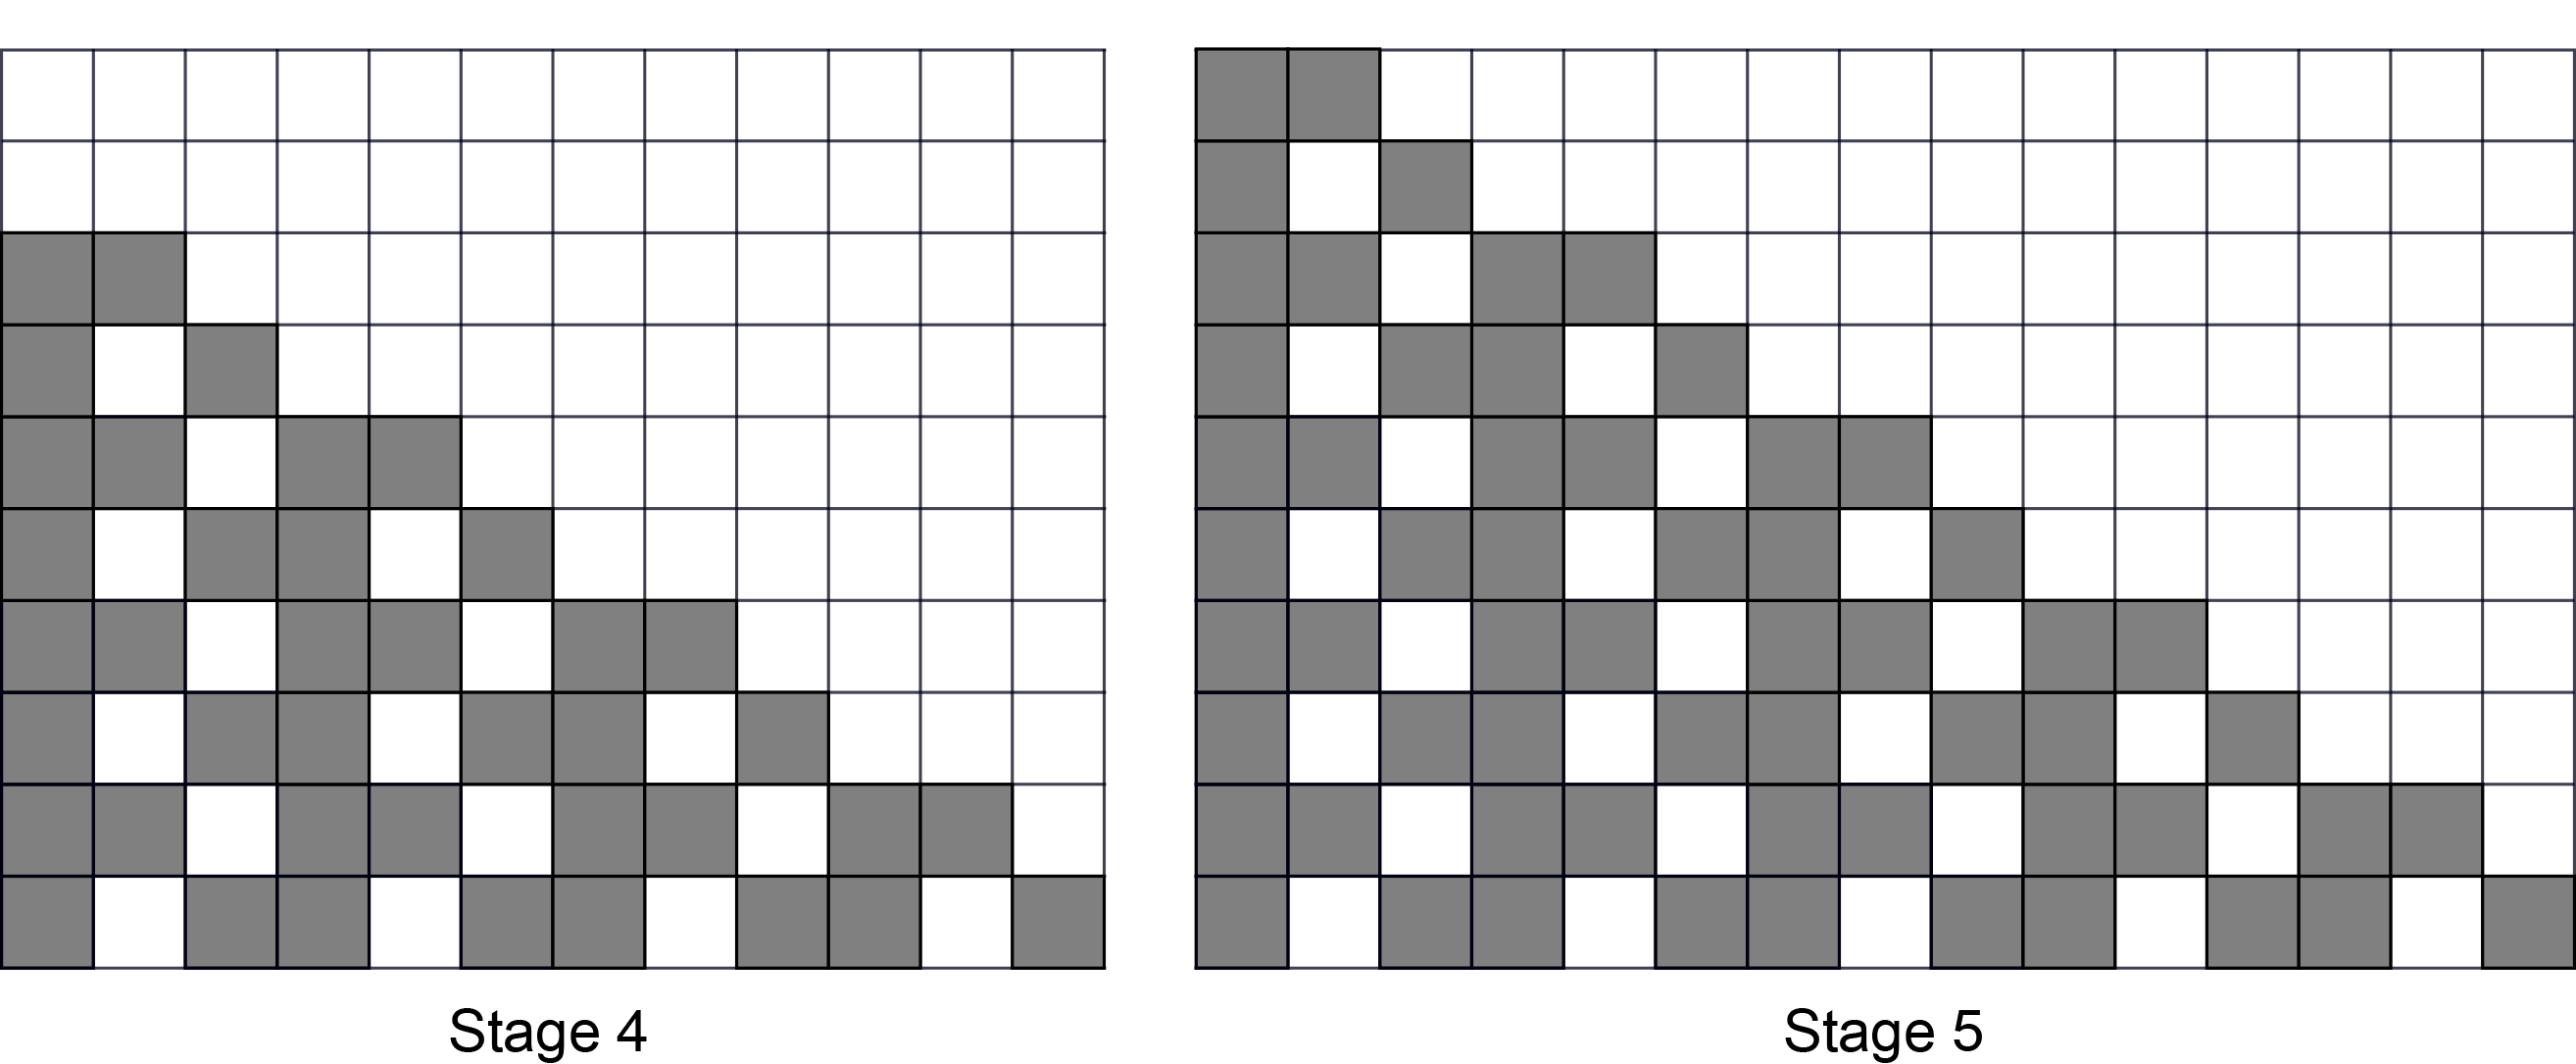 Stage 4 is formed by placing four additional copies of the original pattern immediately to the left of the Stage 3 pattern along the bottom of the larger grid.  These four additional copies are stacked one on top of the other. Stage 5 is formed by placing five additional copies of the original pattern immediately to the left of the Stage 4 pattern along the bottom of the larger grid.  These five additional copies are stacked one on top of the other.